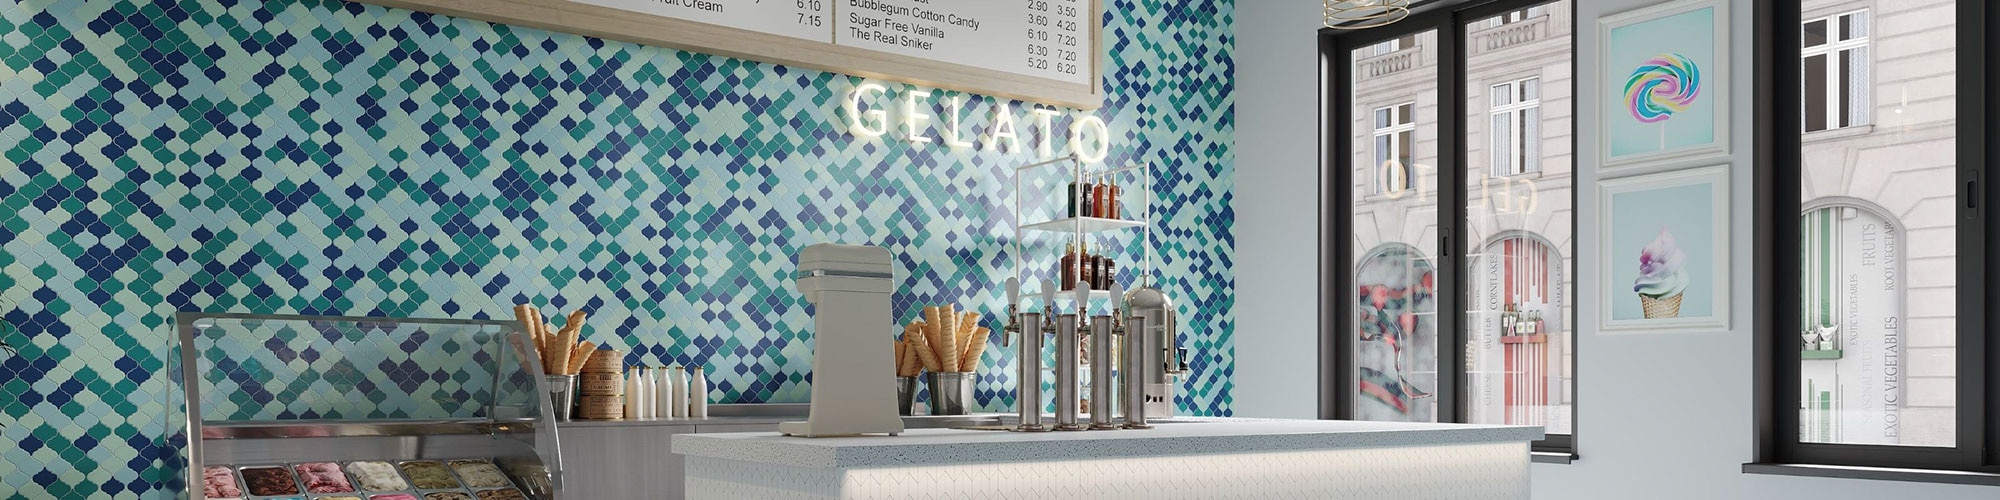 Ice cream parlor with light blue, navy, and teal arabesque mosaic wall tile with menu and ‘Gelato’ neon sign, and white quartz checkout counter.